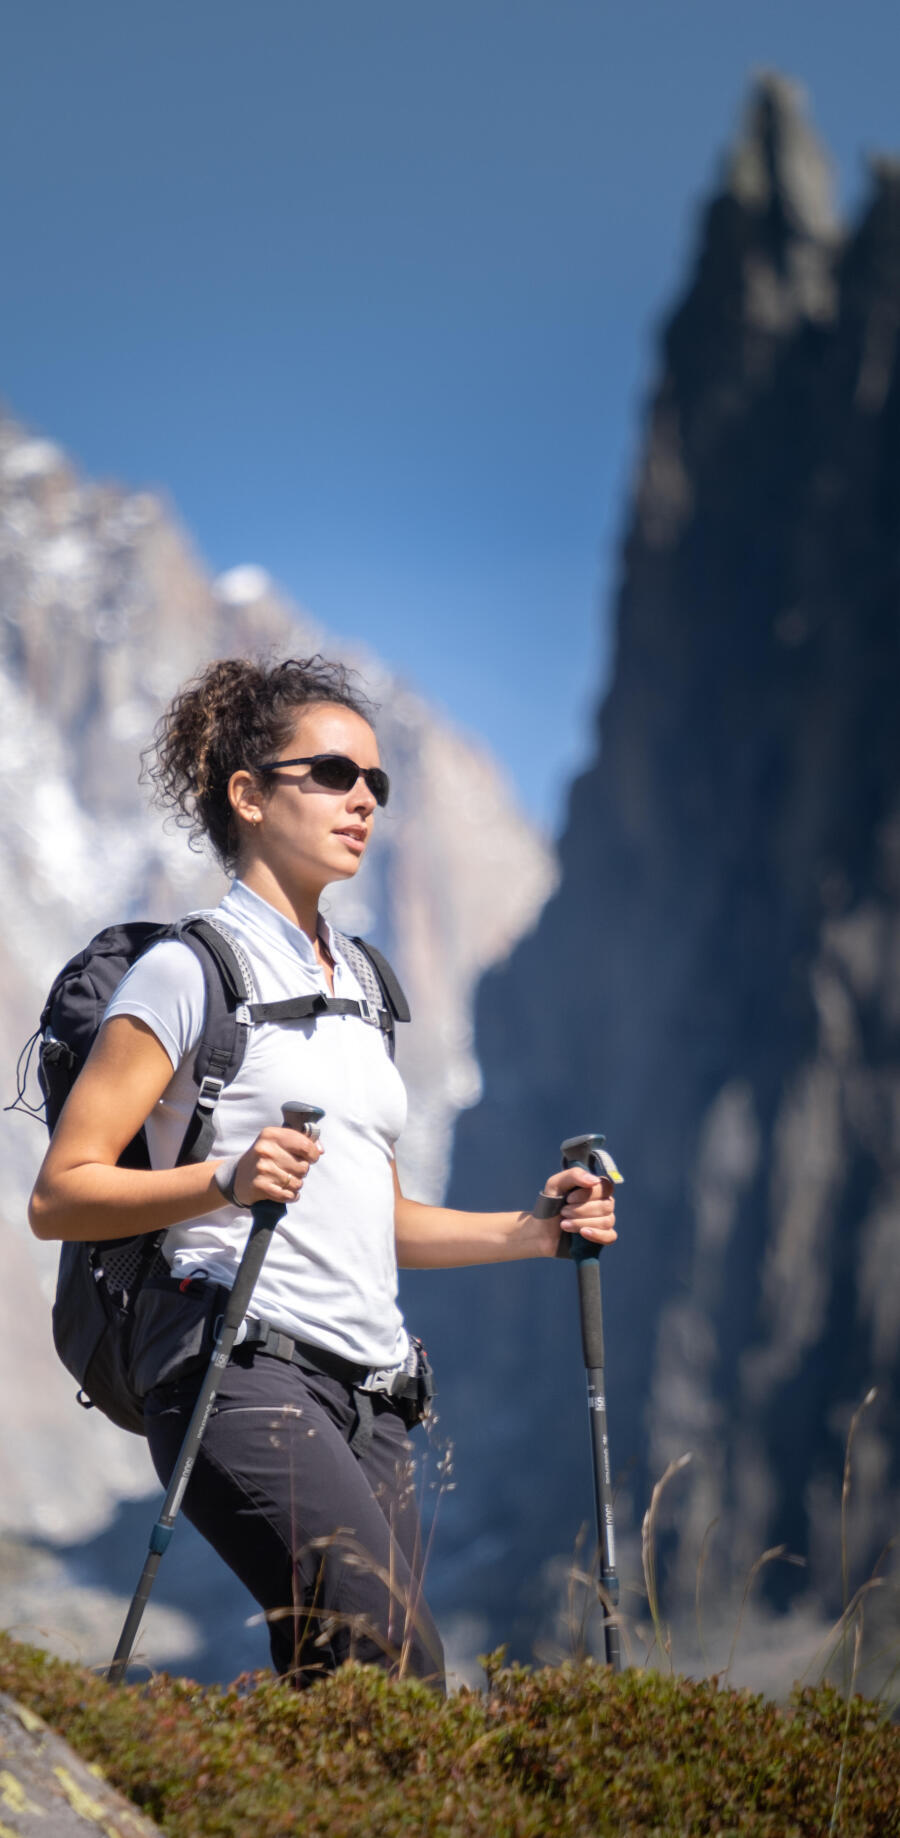 HOW TO CHOOSE YOUR HIKING SUNGLASSES?